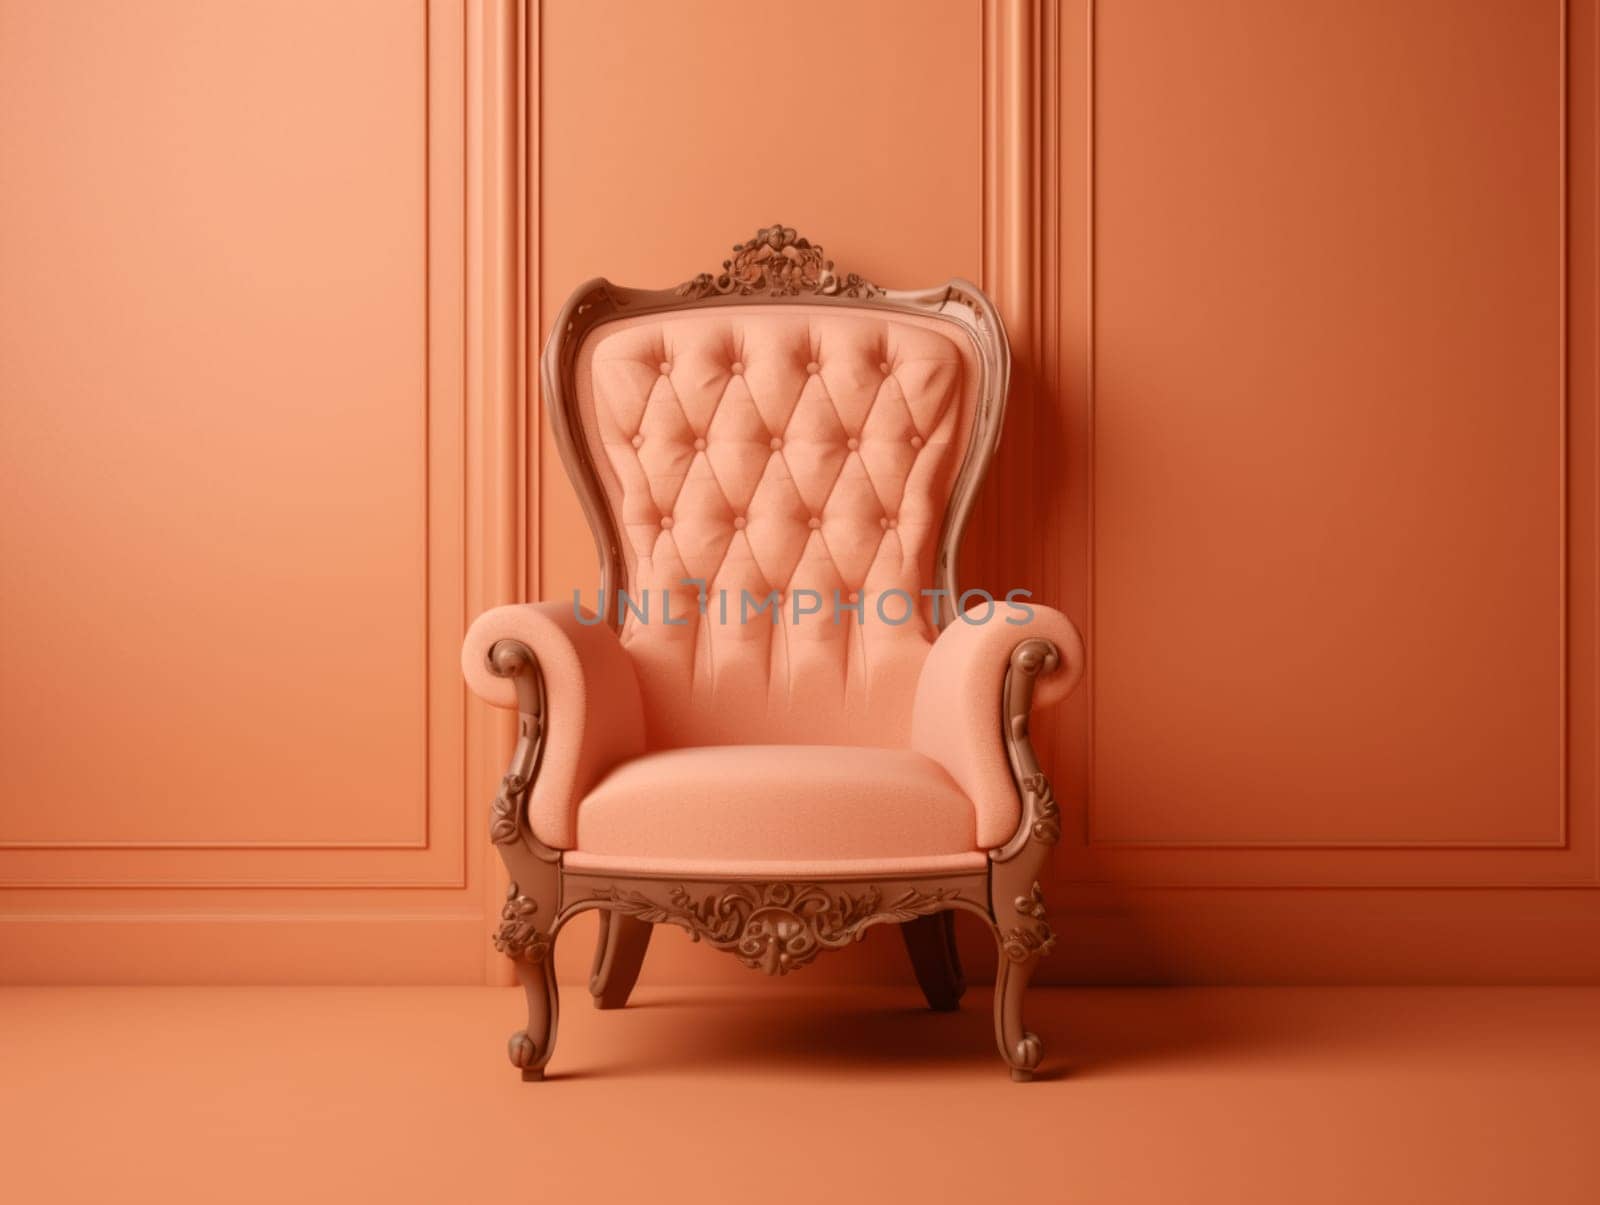 A soft peach-colored chair against a wall with sunlight from the window. High quality photo